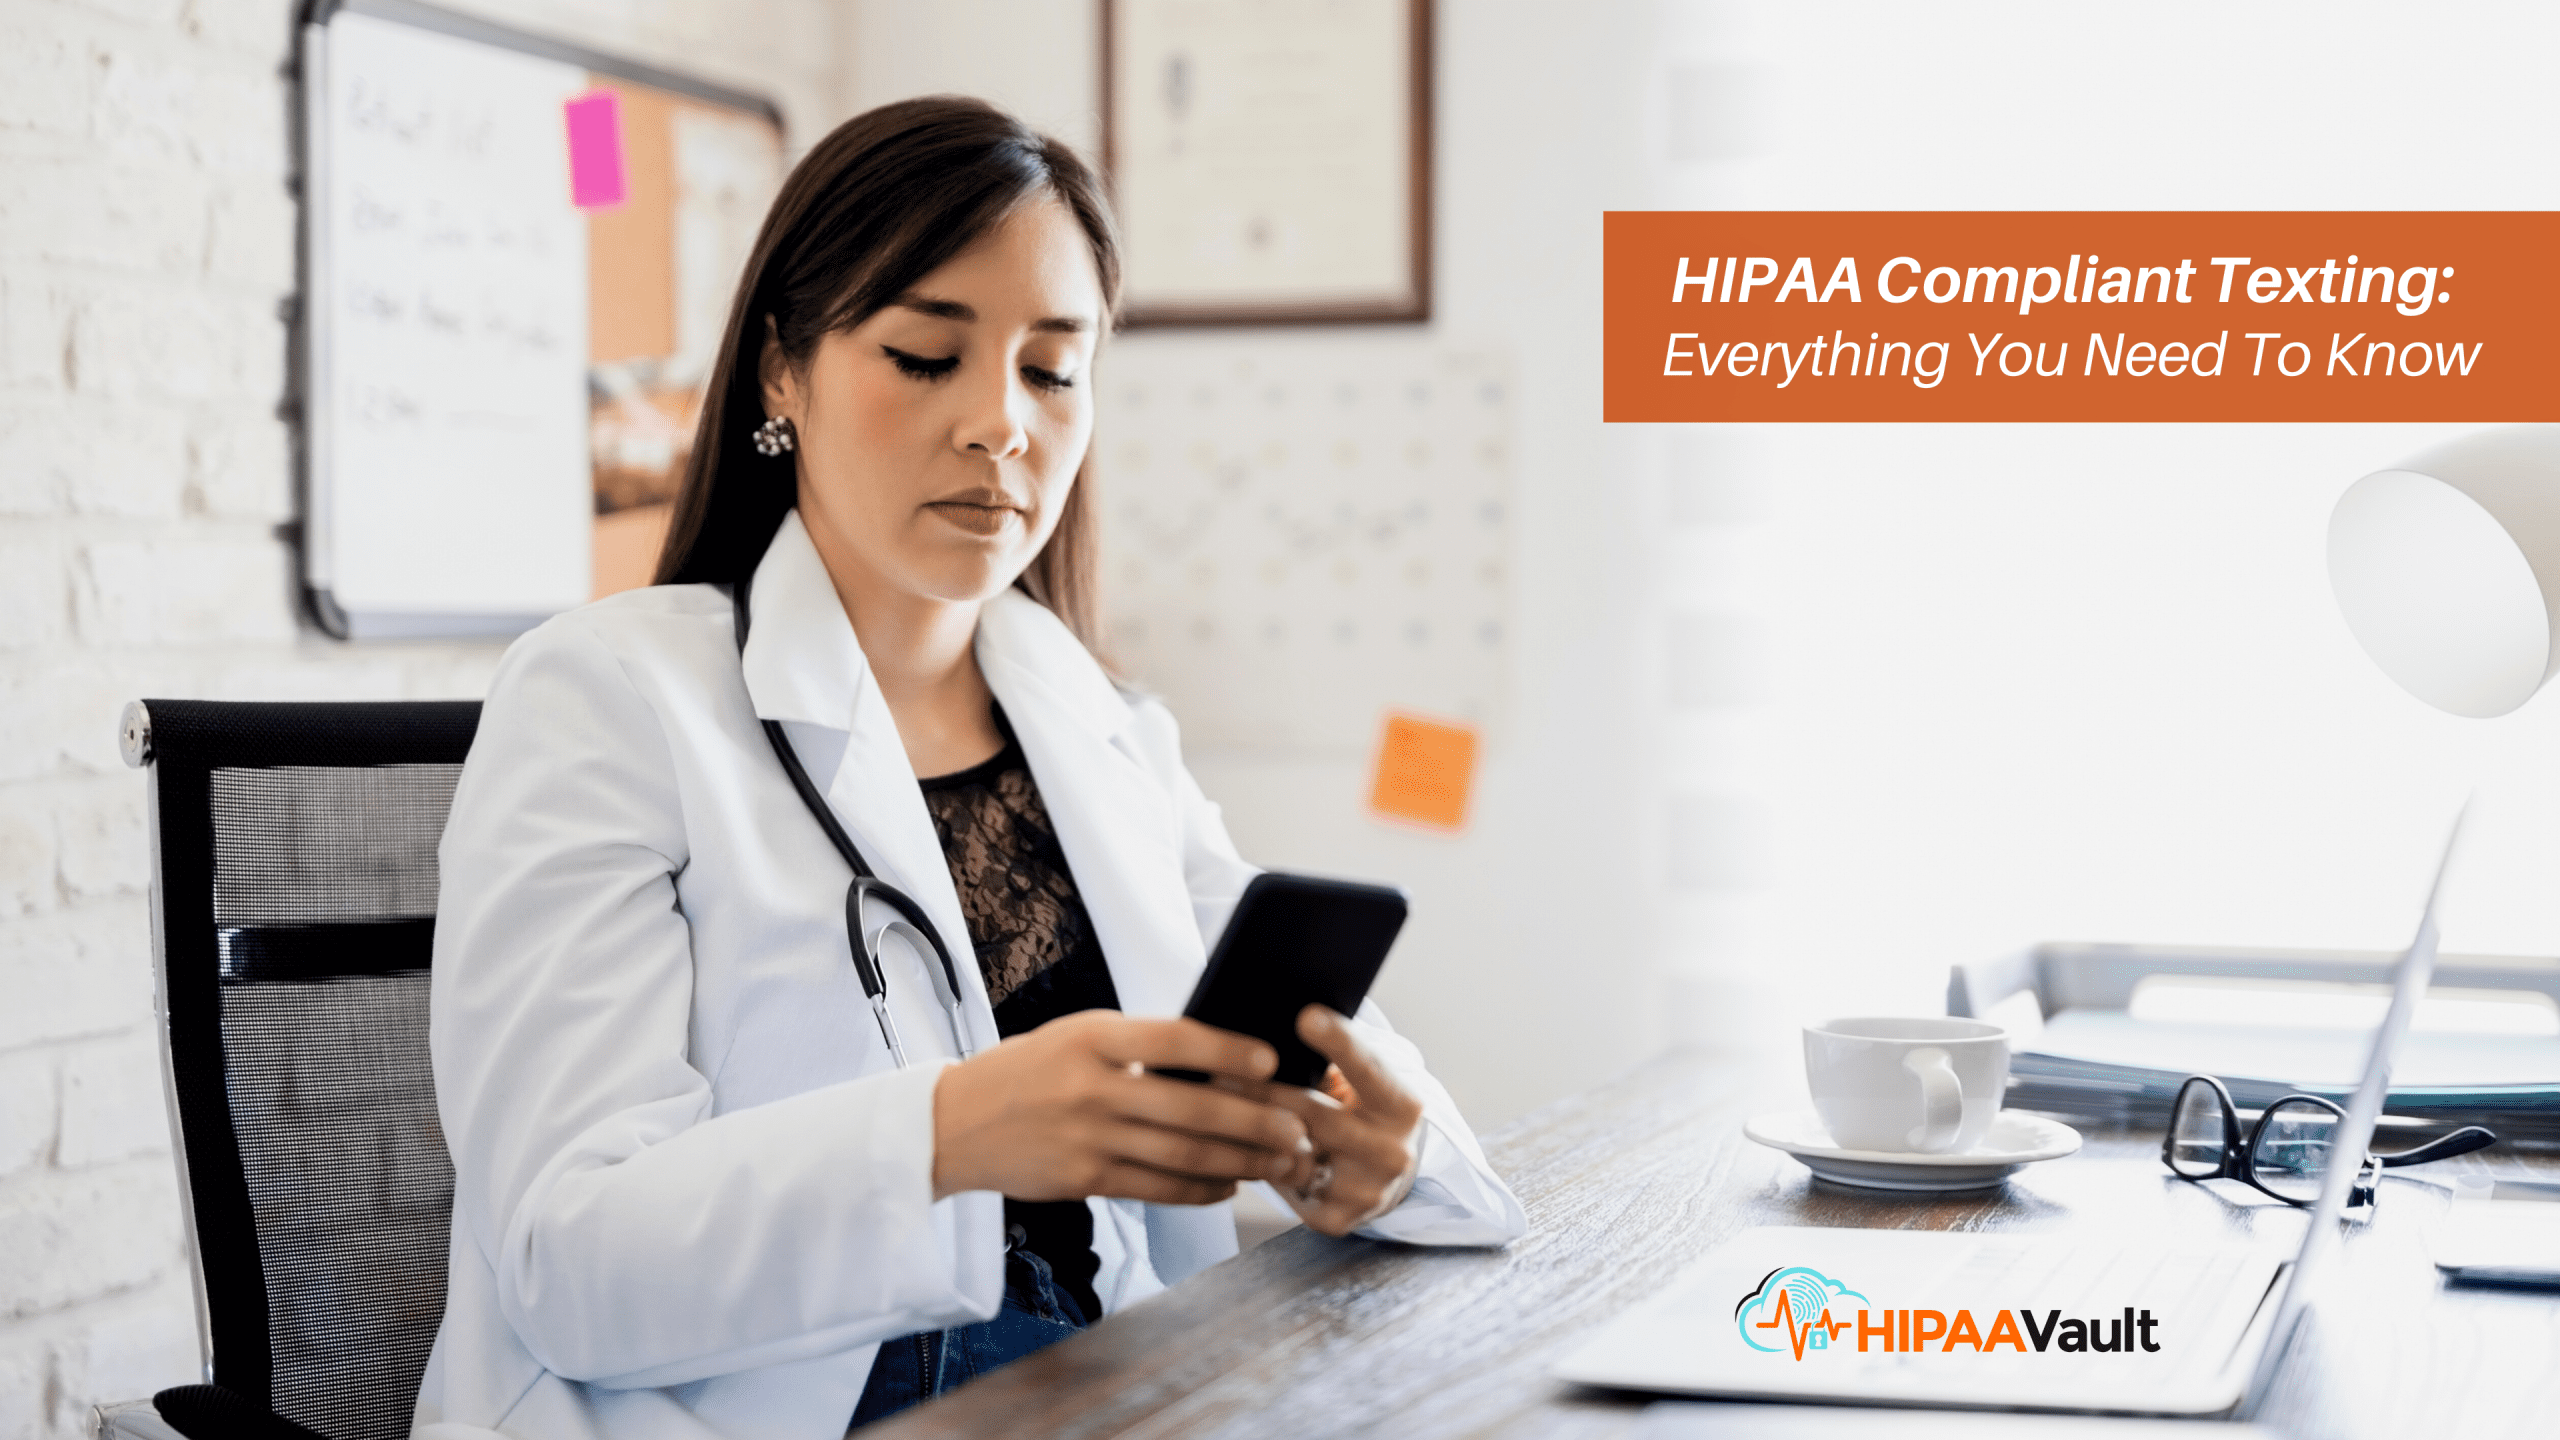 HIPAA Compliant Texting: Everything You Need To Know